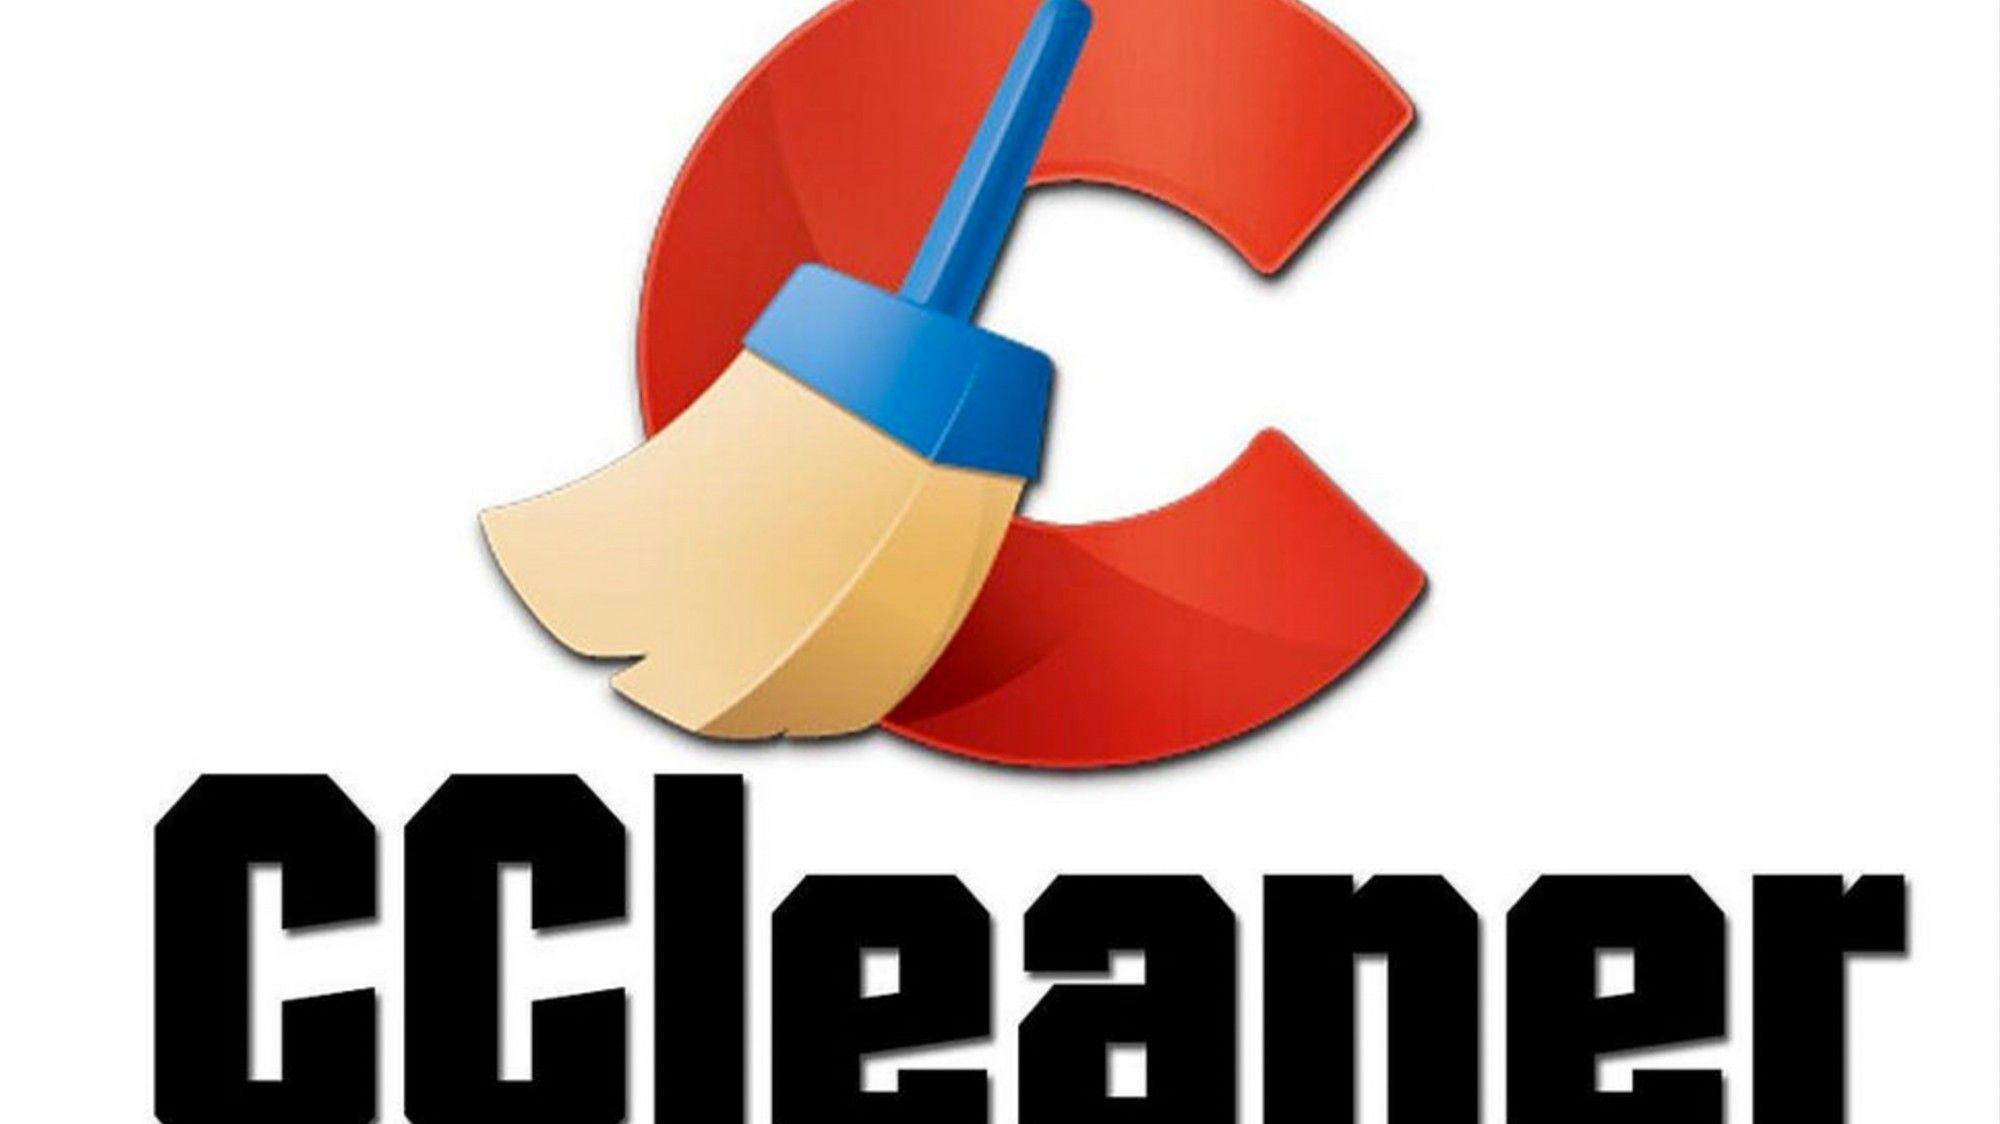 CCleaner Logo - Malware-Infected CCleaner Installer Distributed to Users Via ...